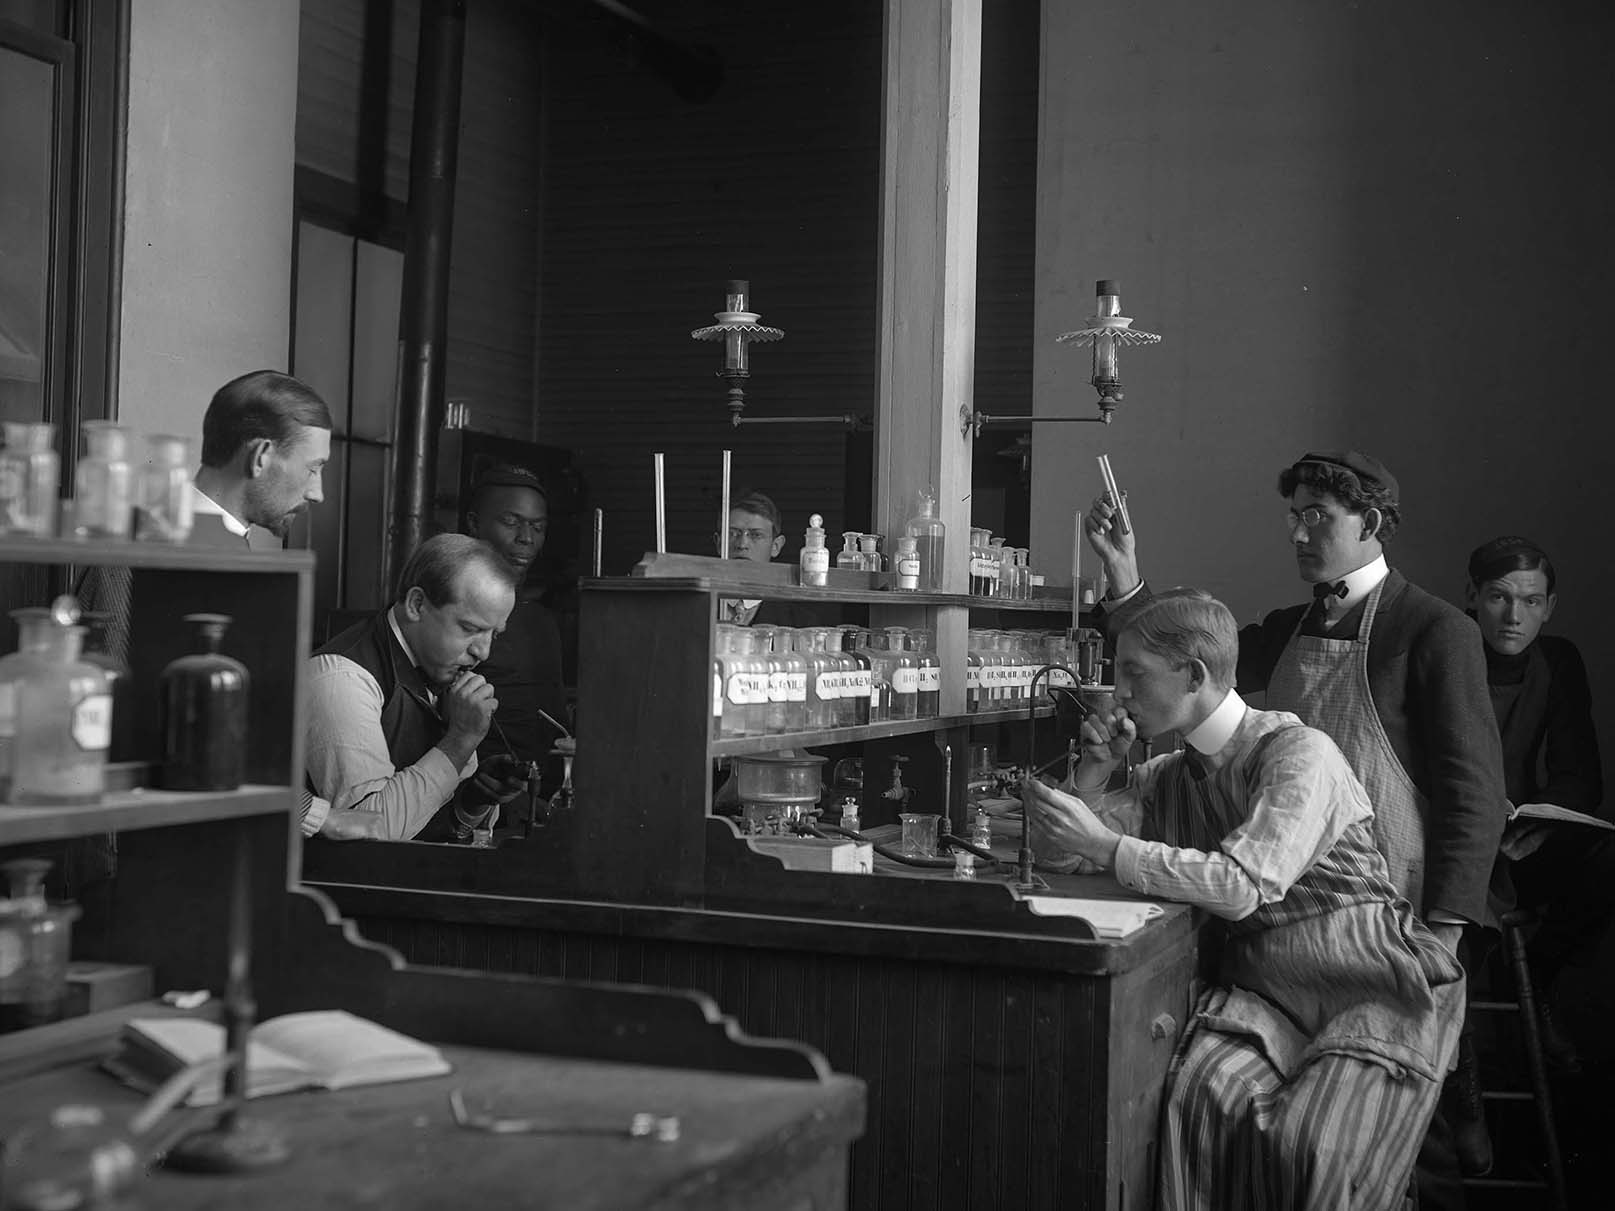 Students in chemistry laboratory, 1904